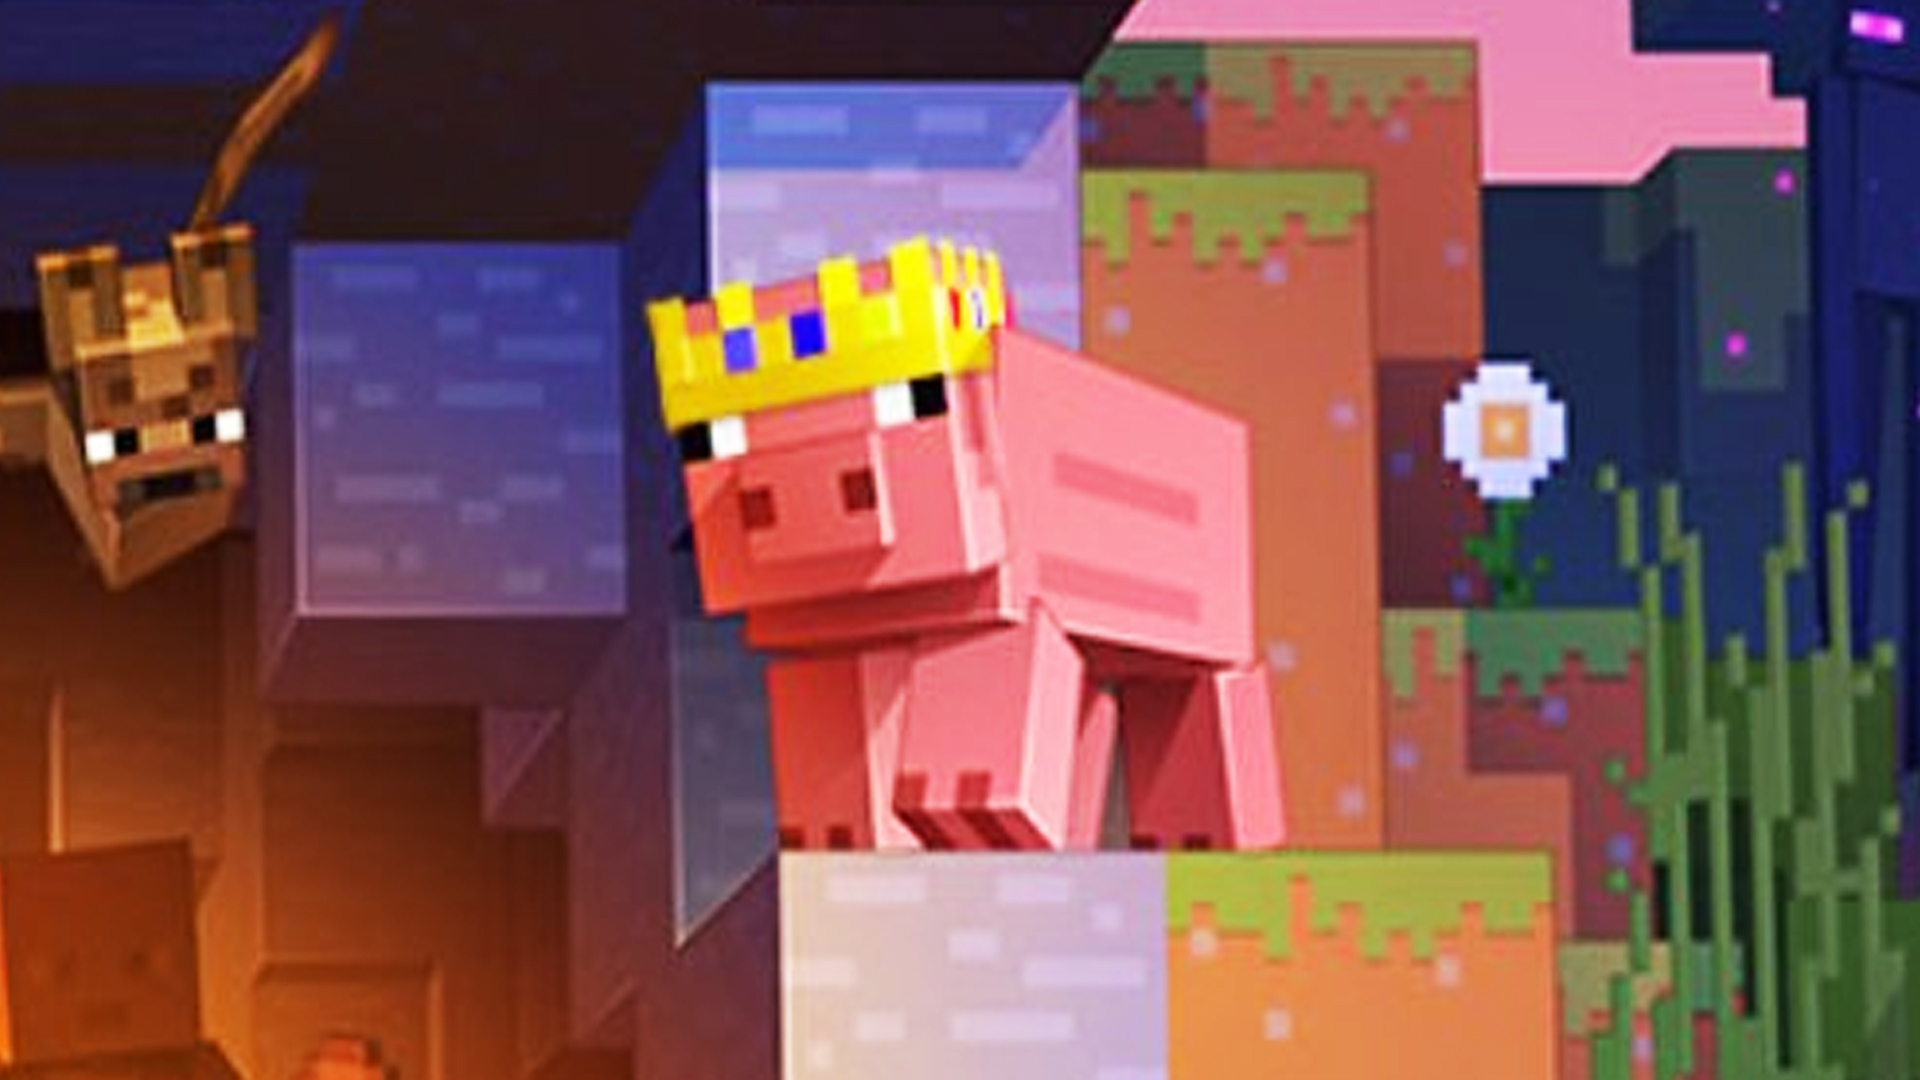 Mojang added Technoblade's crown to the pig on the Minecraft